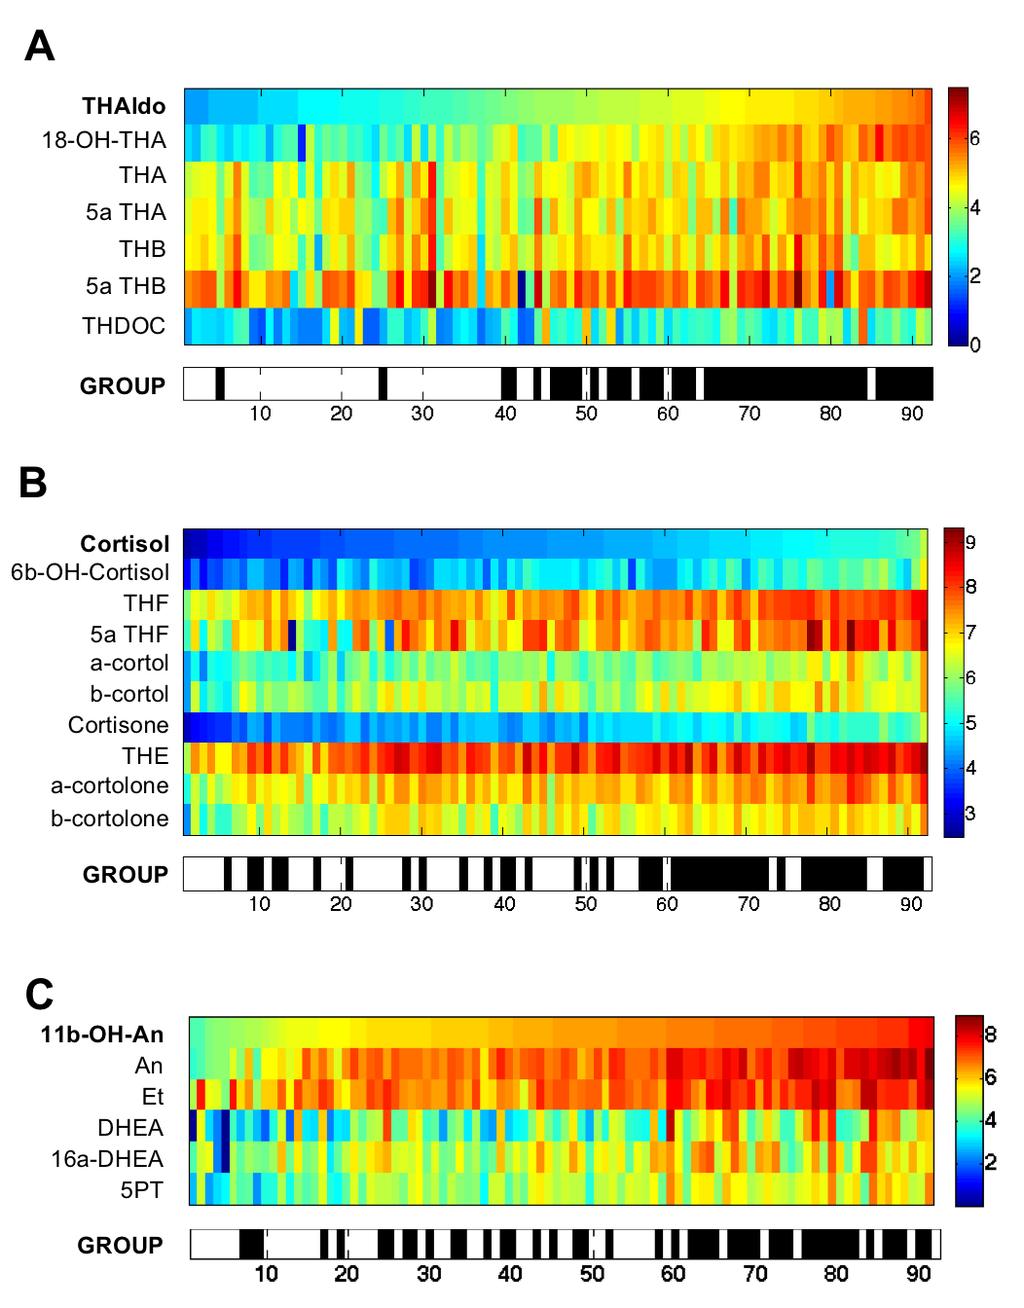 Figure S4: Heat map visualizations of steroid metabolome profiling in 46 primary aldosteronism patients comparing pre-operative (group: black) and post-operative (group: white) 24-h urinary steroid